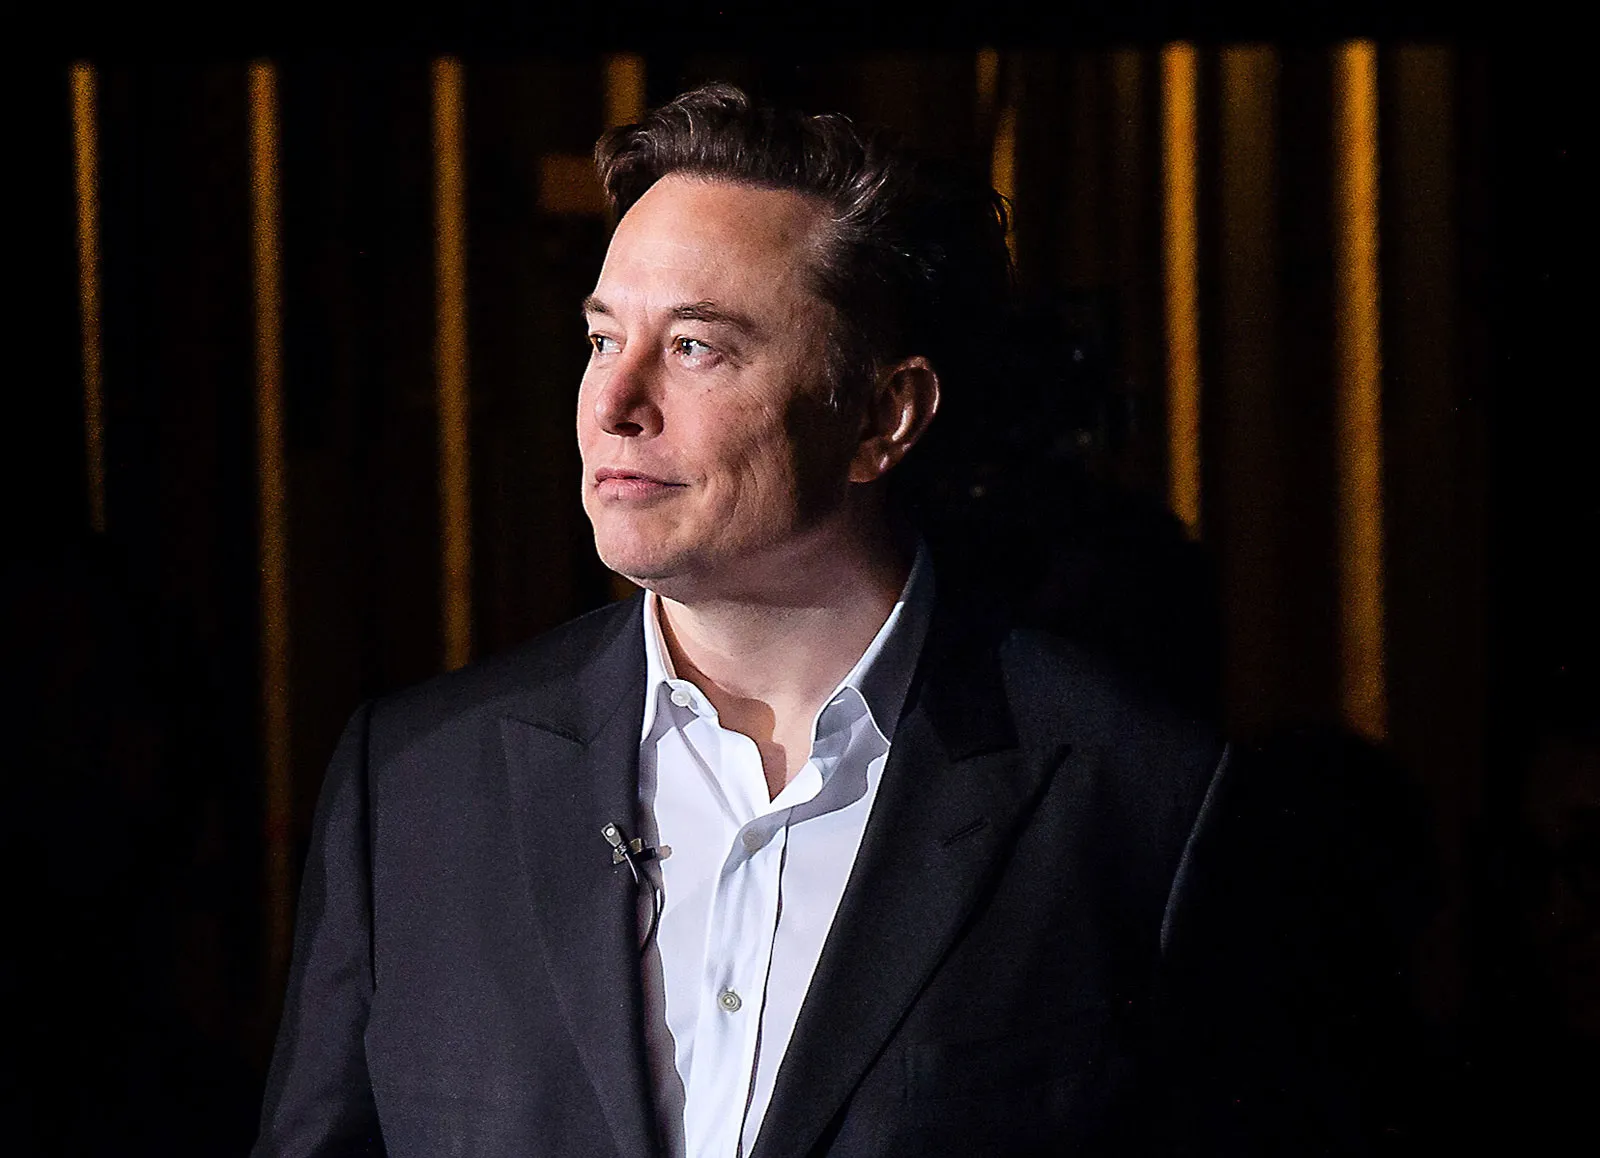 Elon Musk Voices Concern Over Anti-Chinese Tariffs, Highlights Trade Policy Issues
